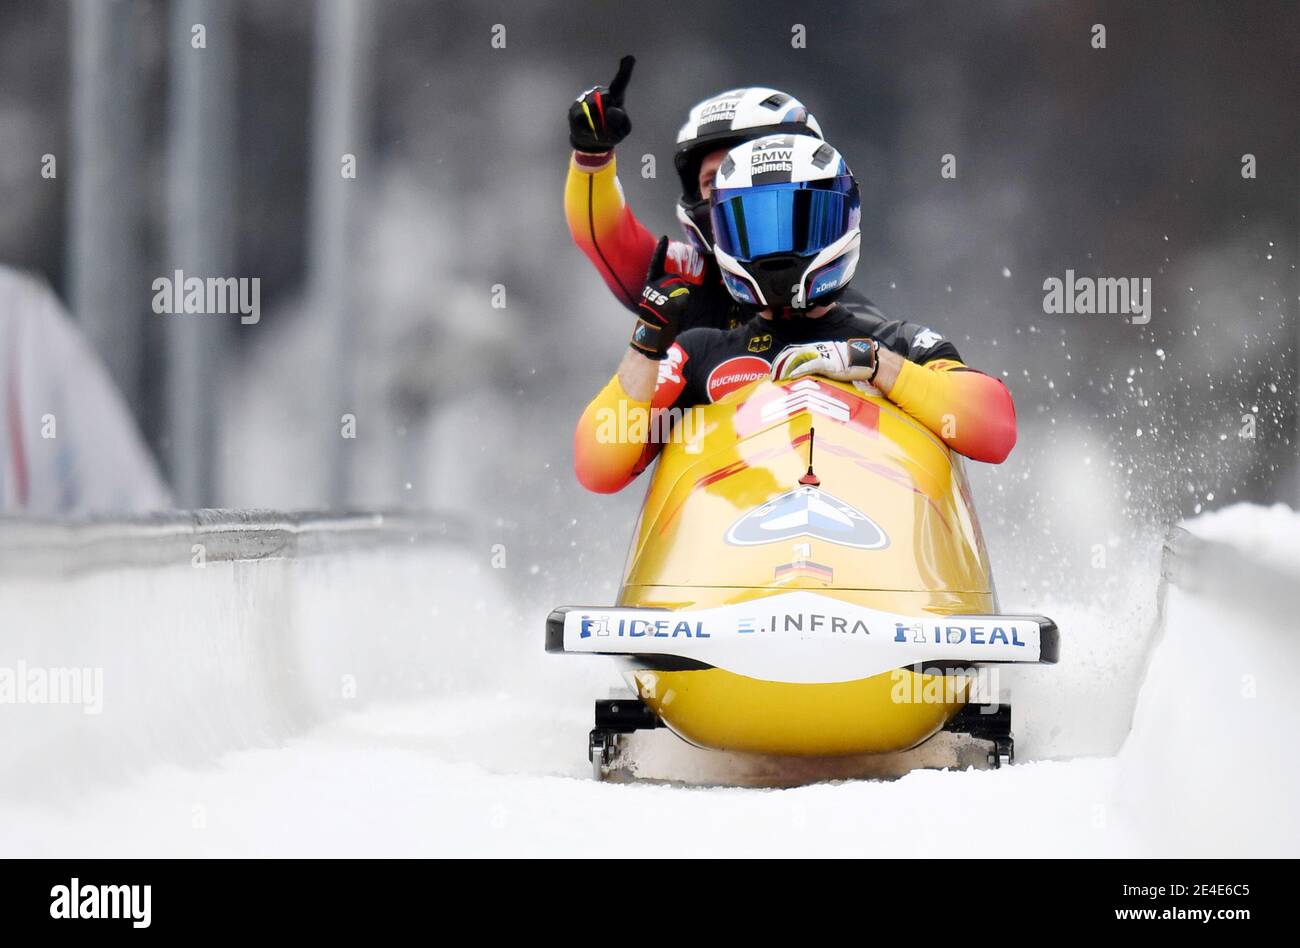 23 January 2021, Bavaria, Schönau Am Königssee: Bobsleigh: World Cup, two-man bobsleigh, men. German bobsledders Francesco Friedrich and Thorsten Margis cross the finish line jubilantly on the artificial ice track at Königssee. Friedrich and Margis took first place. Photo: Tobias Hase/dpa Stock Photo